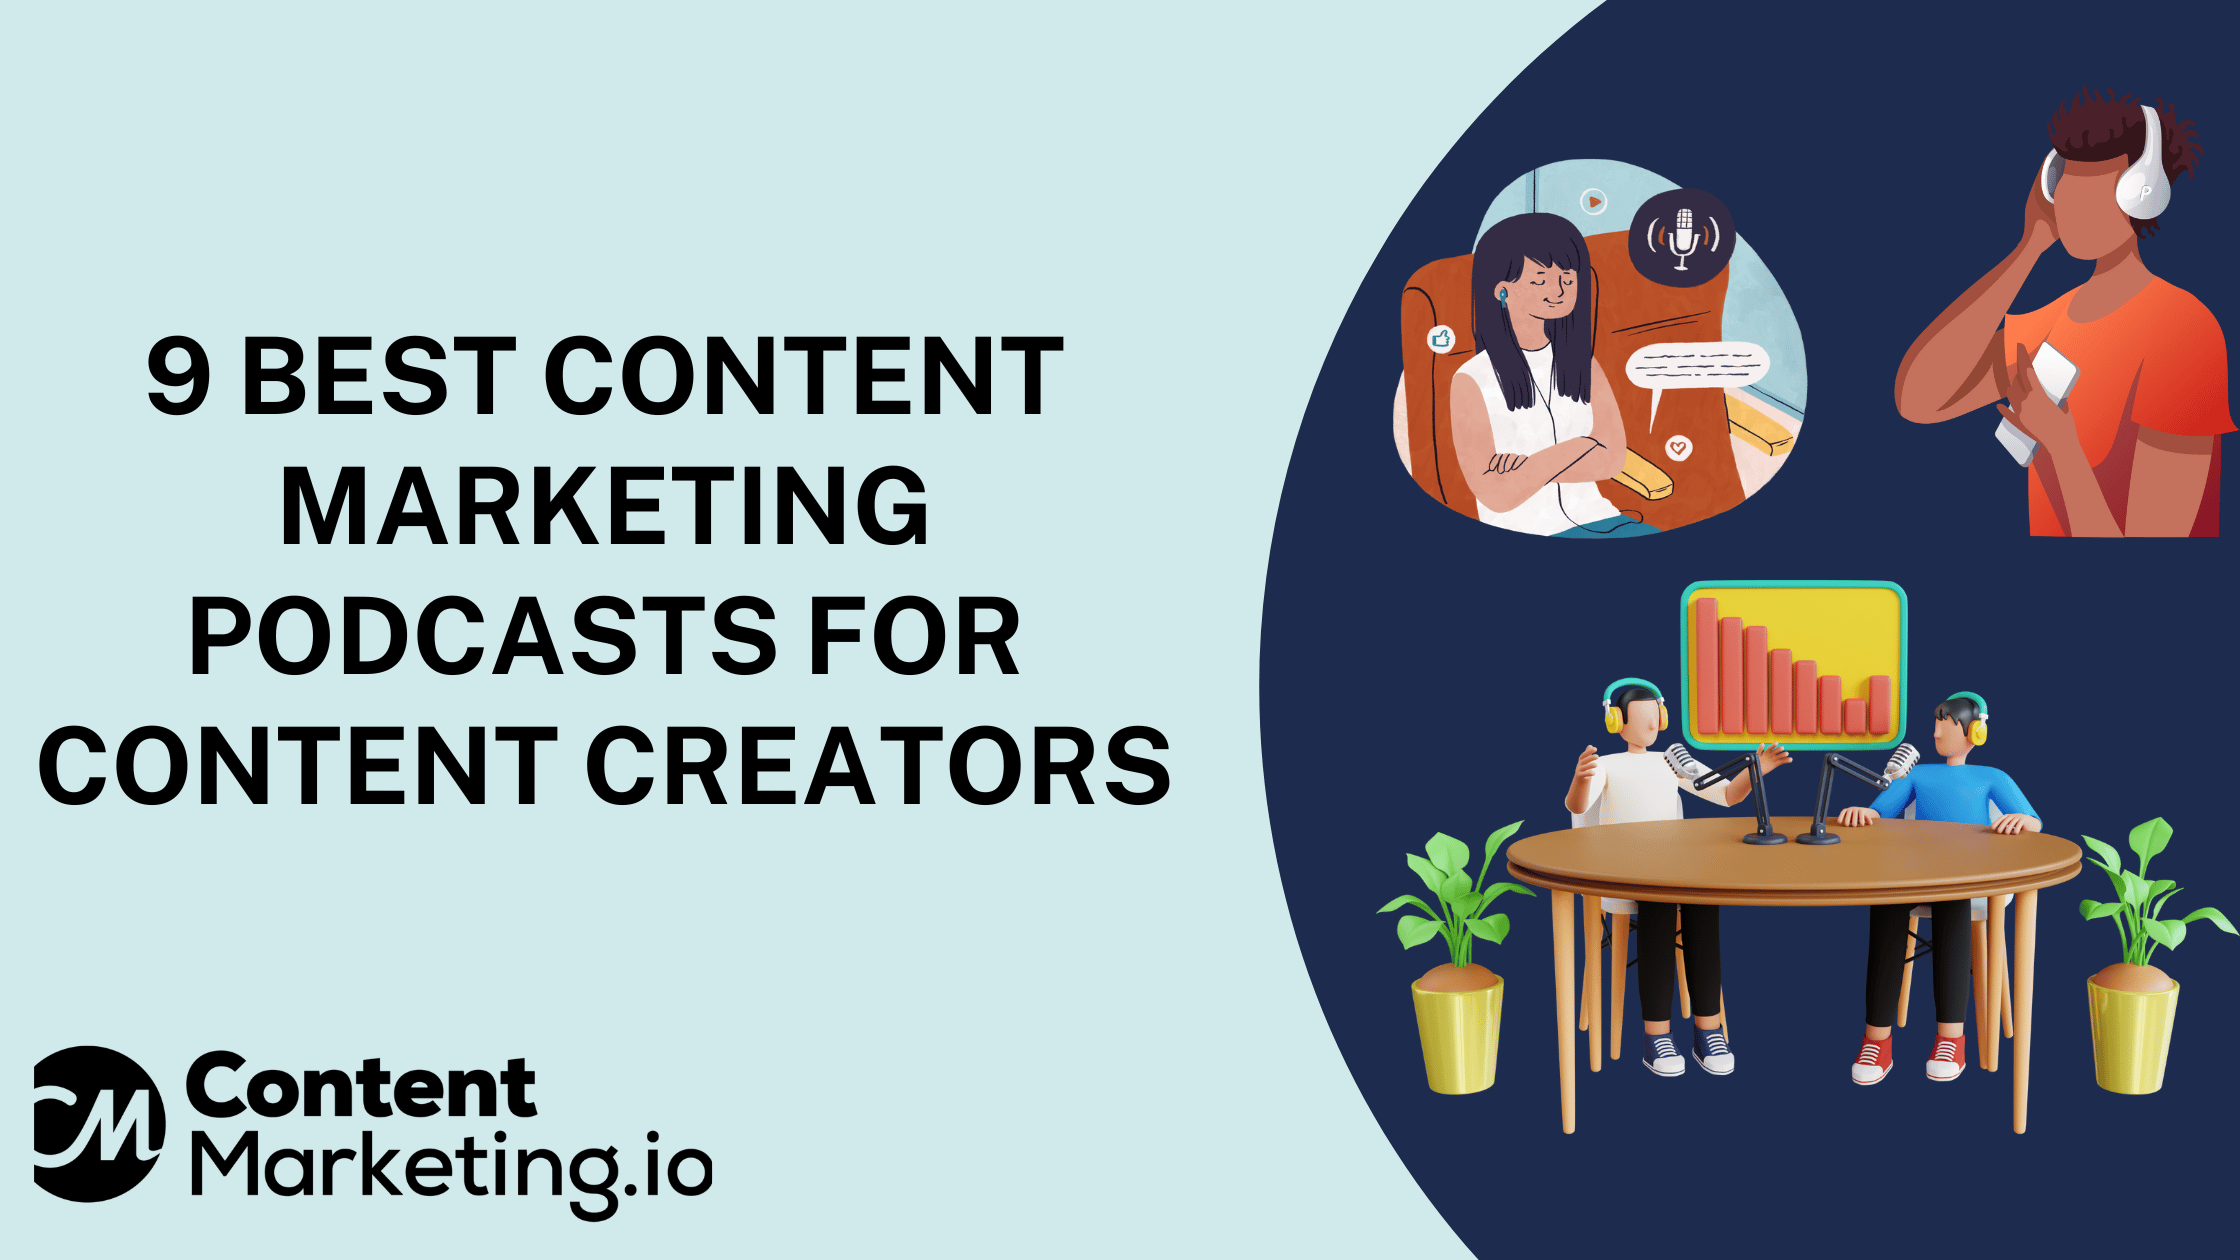 Content Marketing Podcasts